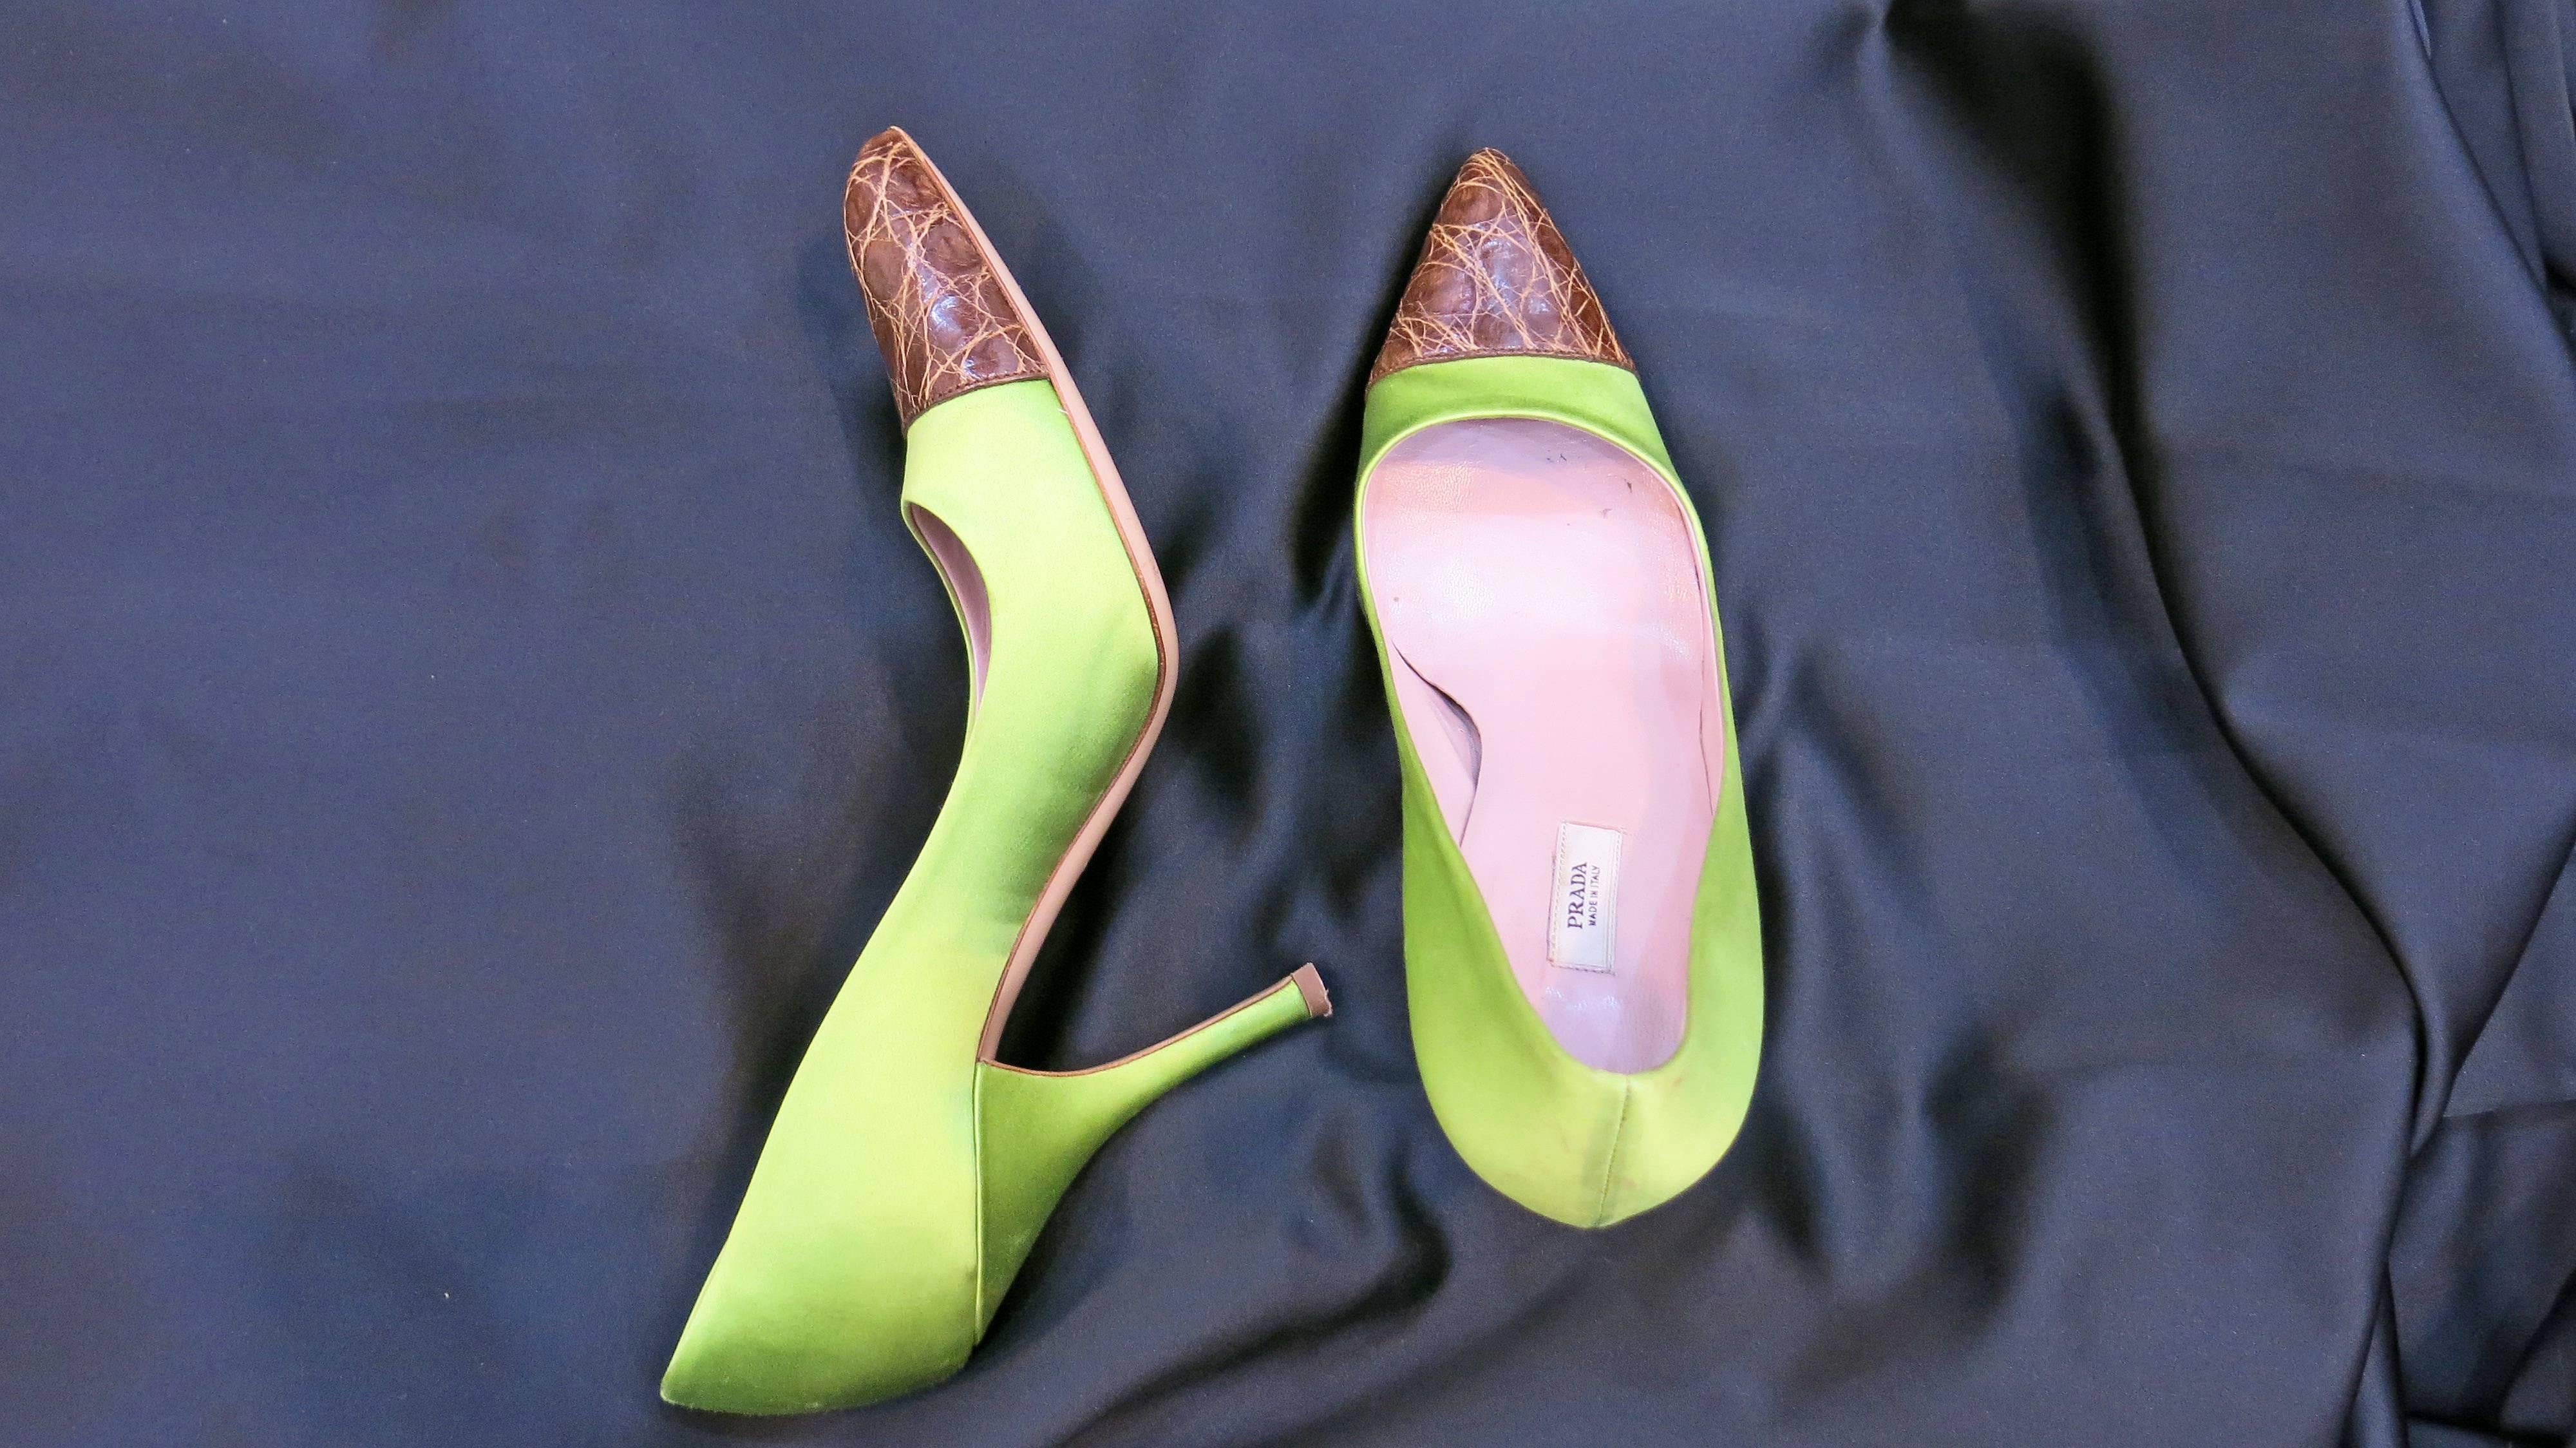 Unique pistachio green satin pumps by Prada with alligator leather toes. Leather soles. Heel is 4". A fun and out-of-the-ordinary shoe that is still reasonable enough for the workplace. A fun pop of color and texture for the drabness of the